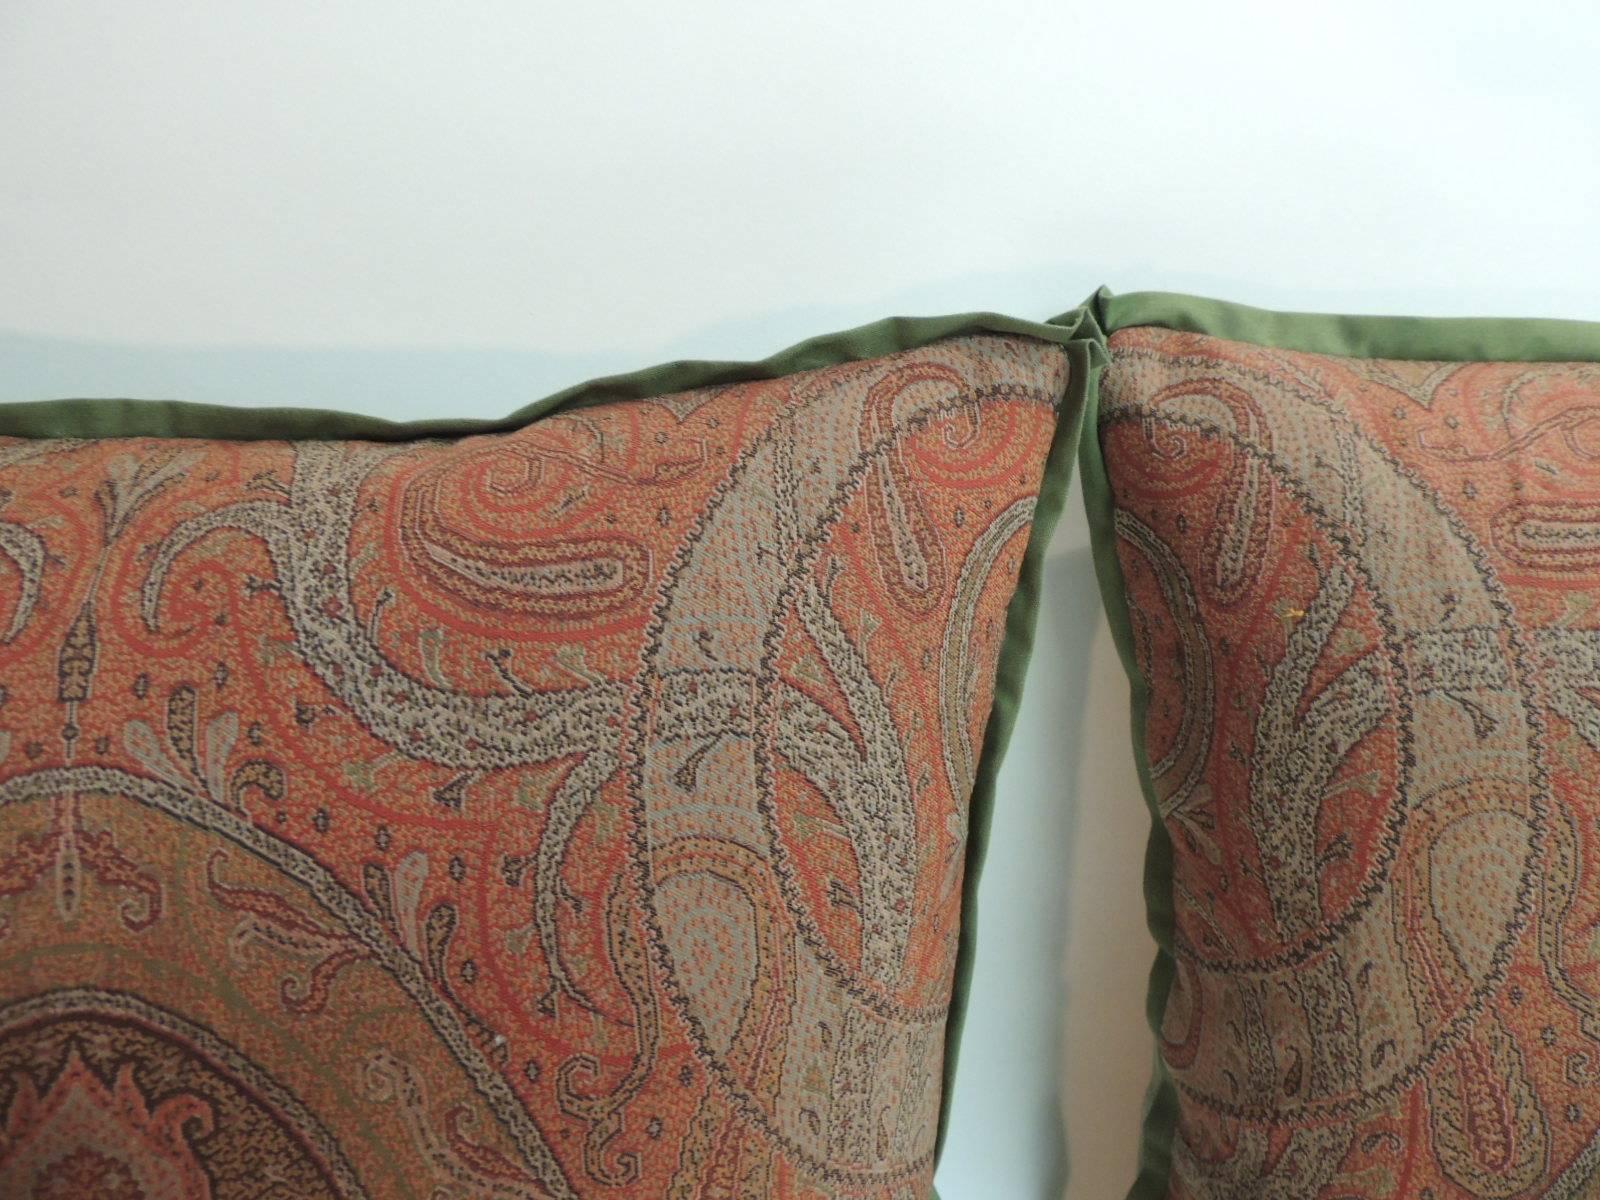 Pair of 19th century, Kashmir woven paisley decorative pillows
Pair of antique textiles paisley decorative pillows with ATG sheer cotton green flat trim and textured linen green backing. Antique textile fragments in the front are with shades of,